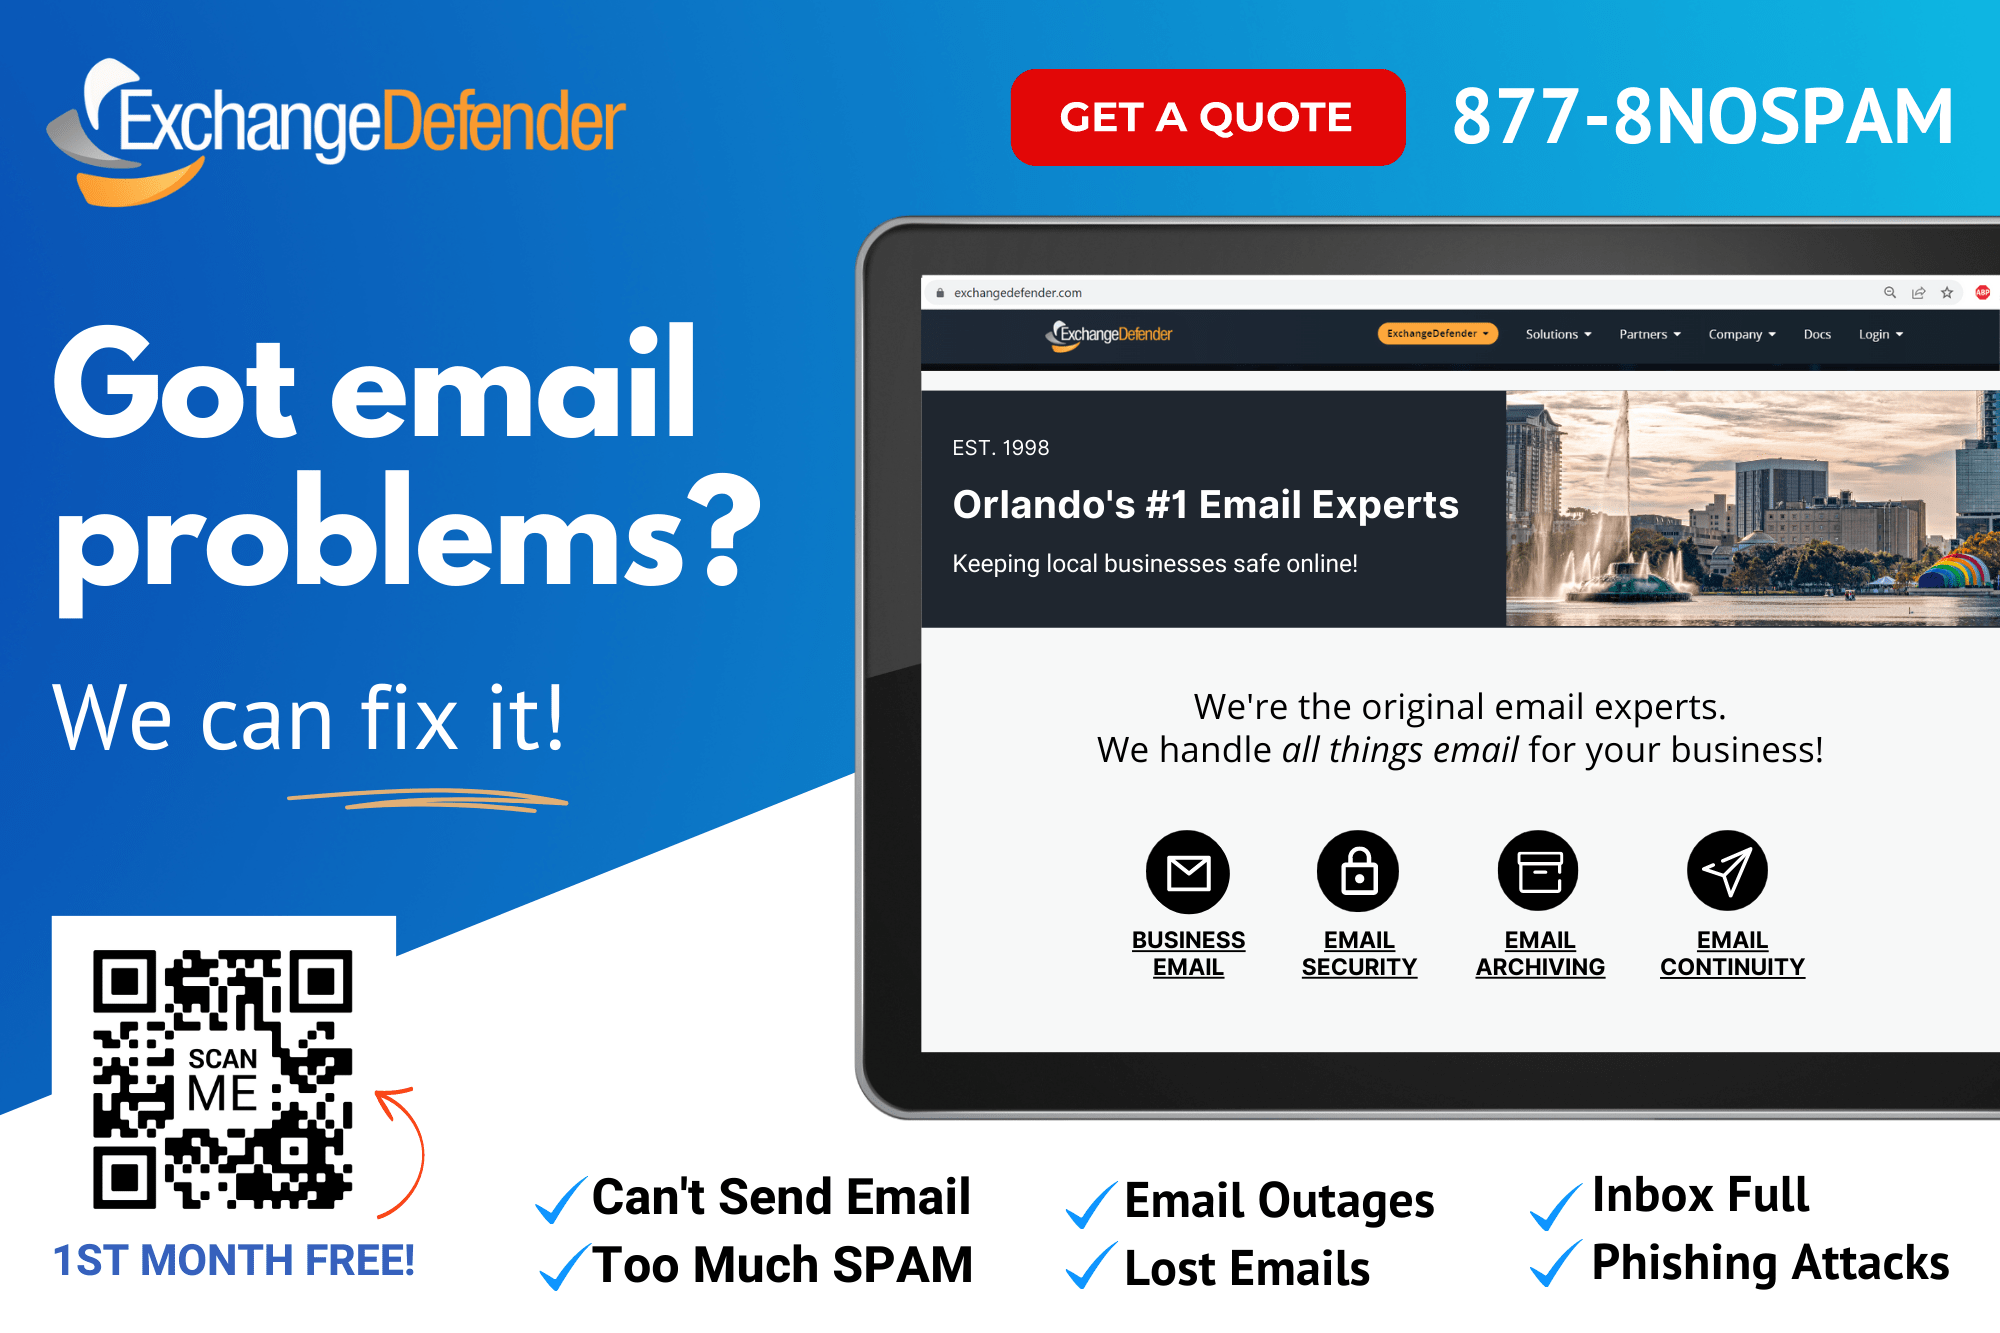 Got Email Problems. We can fix it